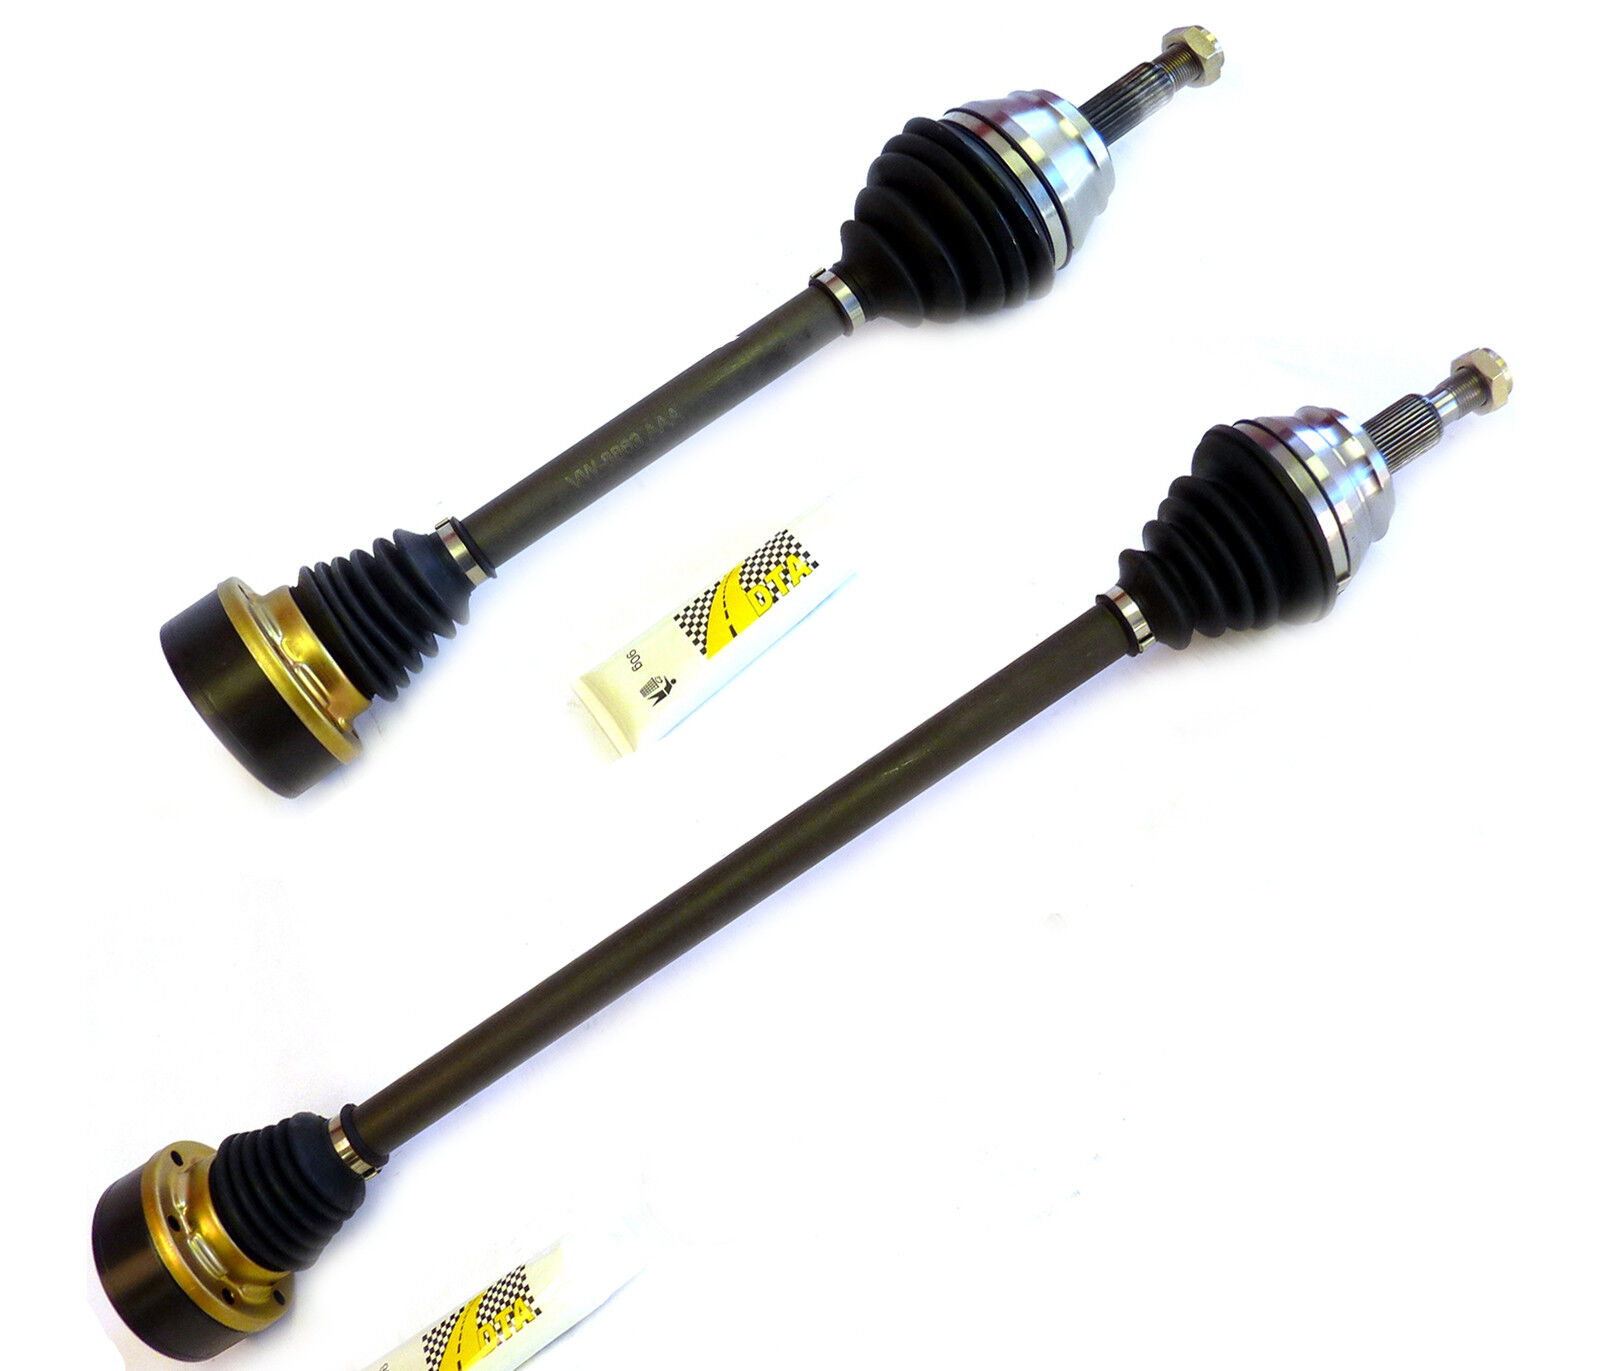 2 New CV Axles Front Left & Right Fit 1993-85 Cabriolet  88-85 Scirocco 16 Valve